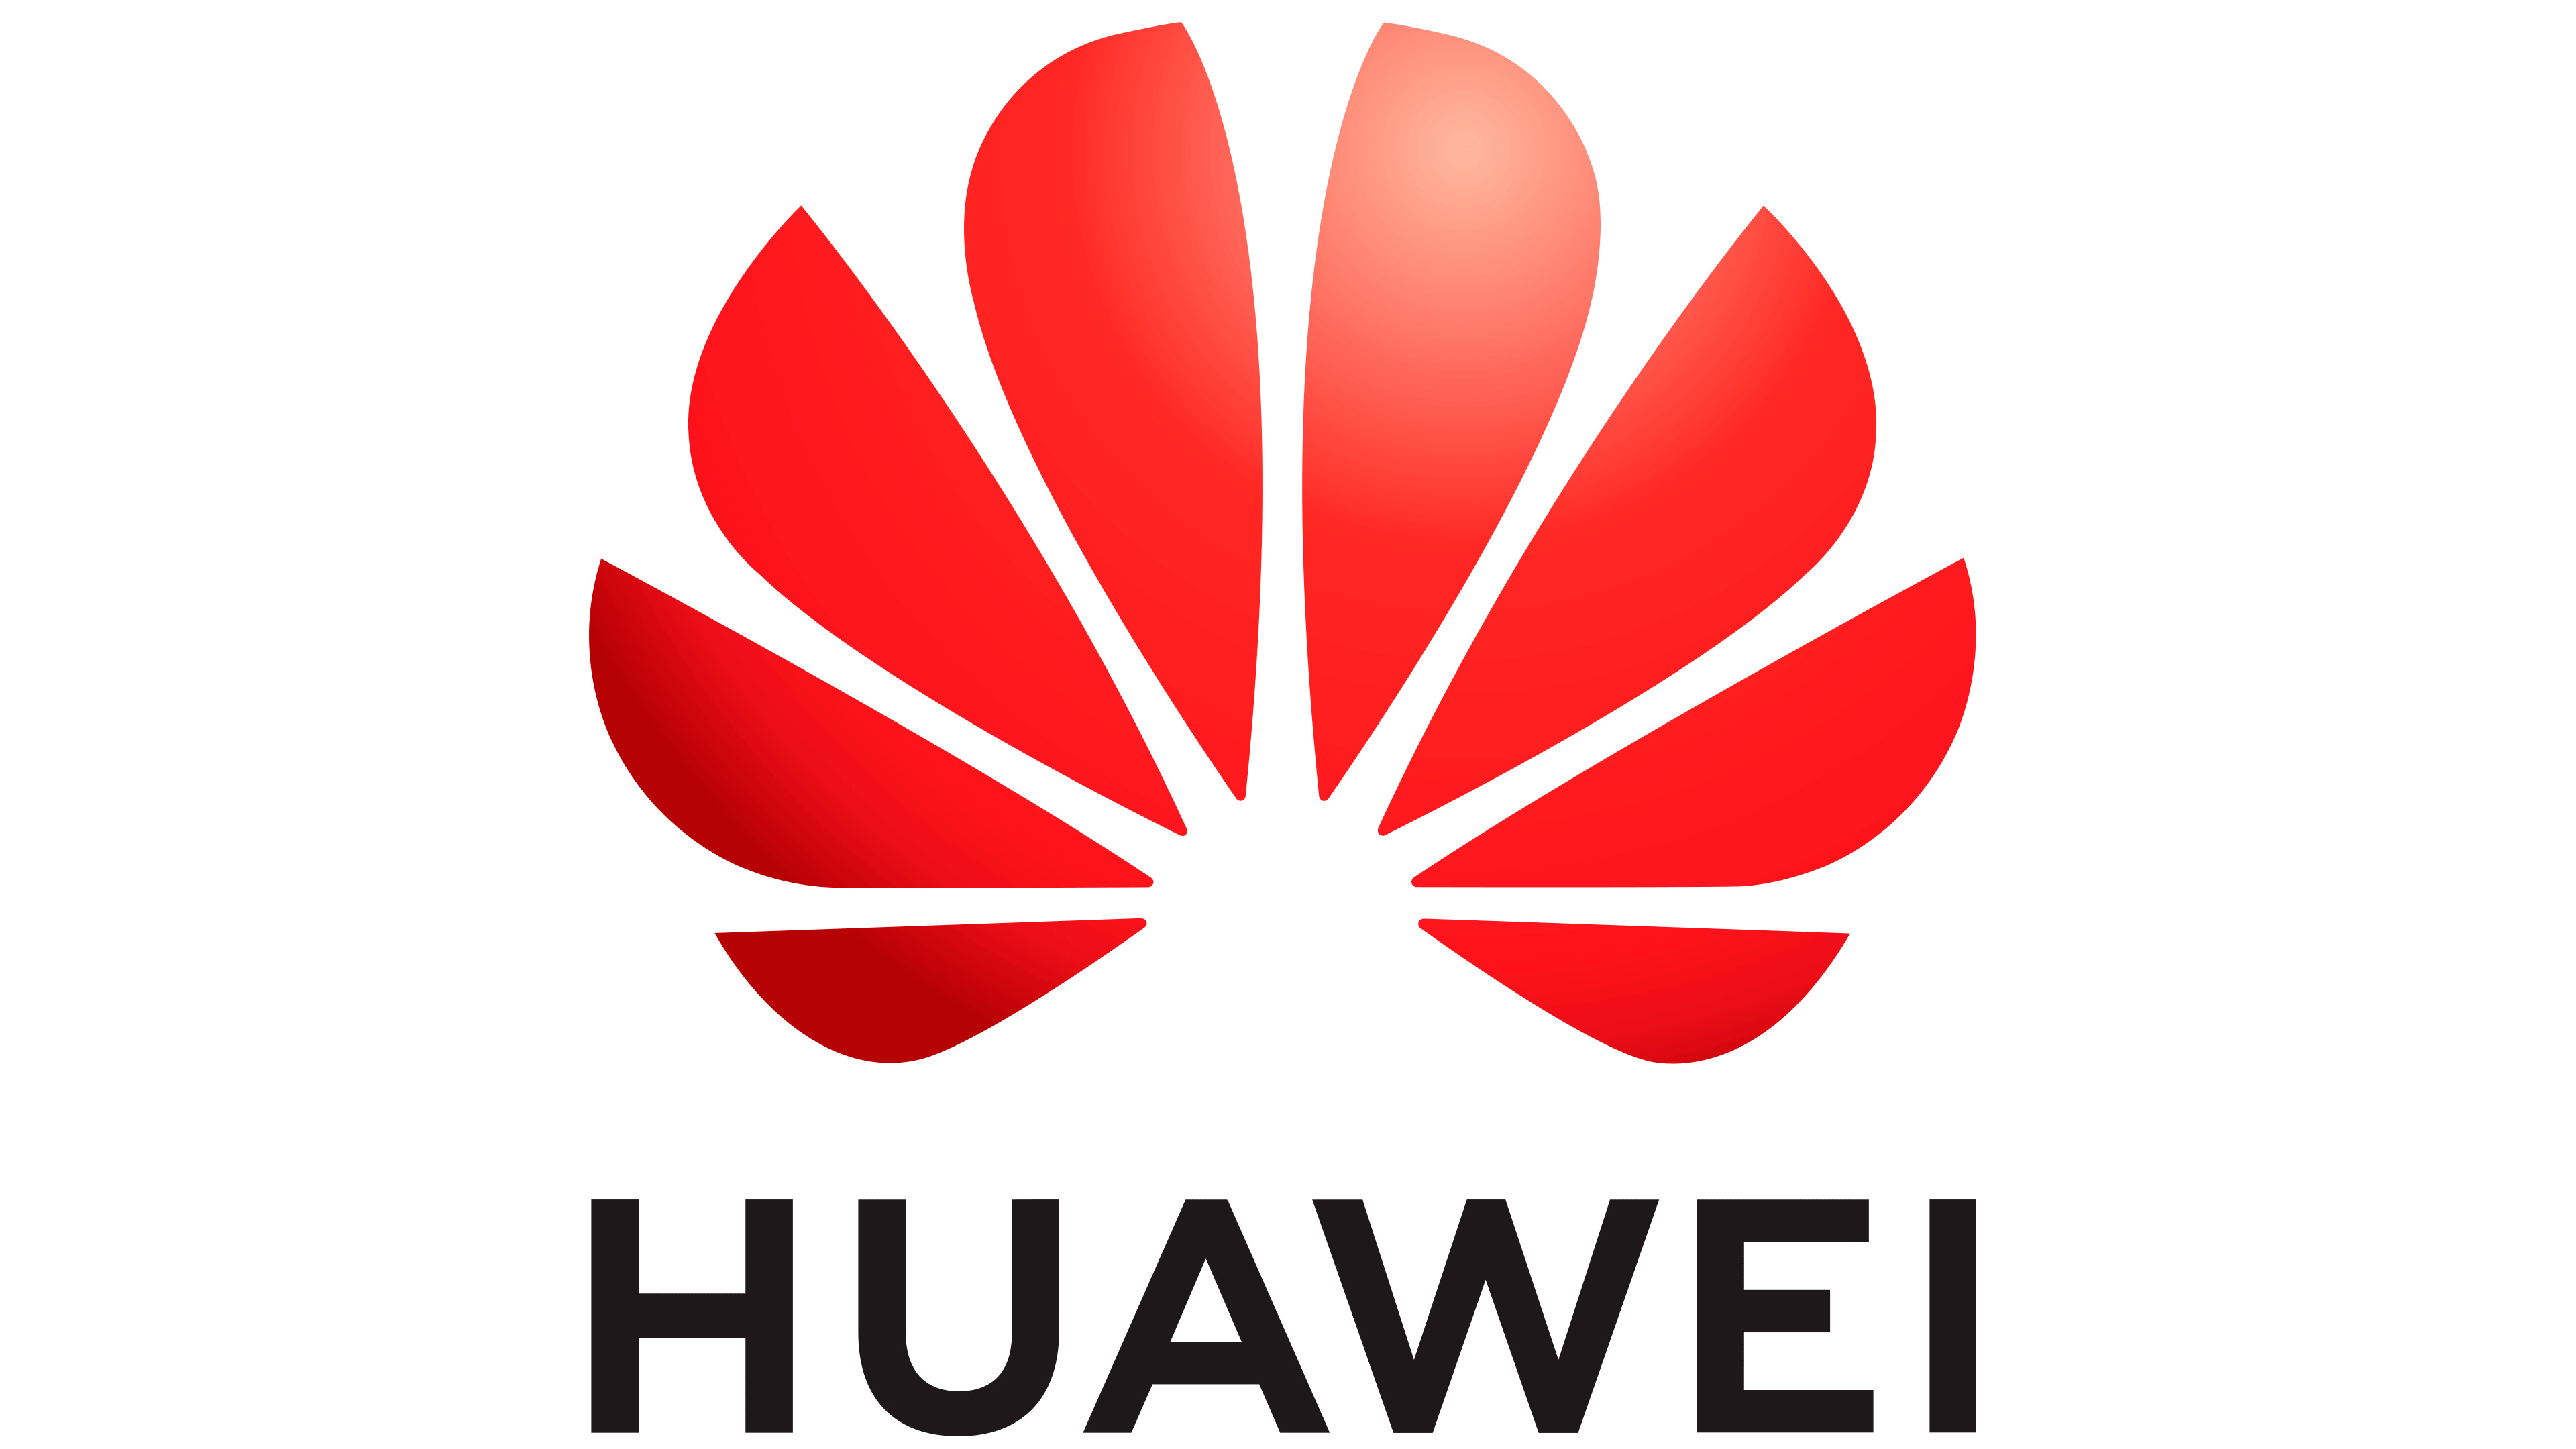 Huawei: The company produces and sells telecommunications equipment, consumer electronics and various smart devices. 3840x2160 4K Wallpaper.